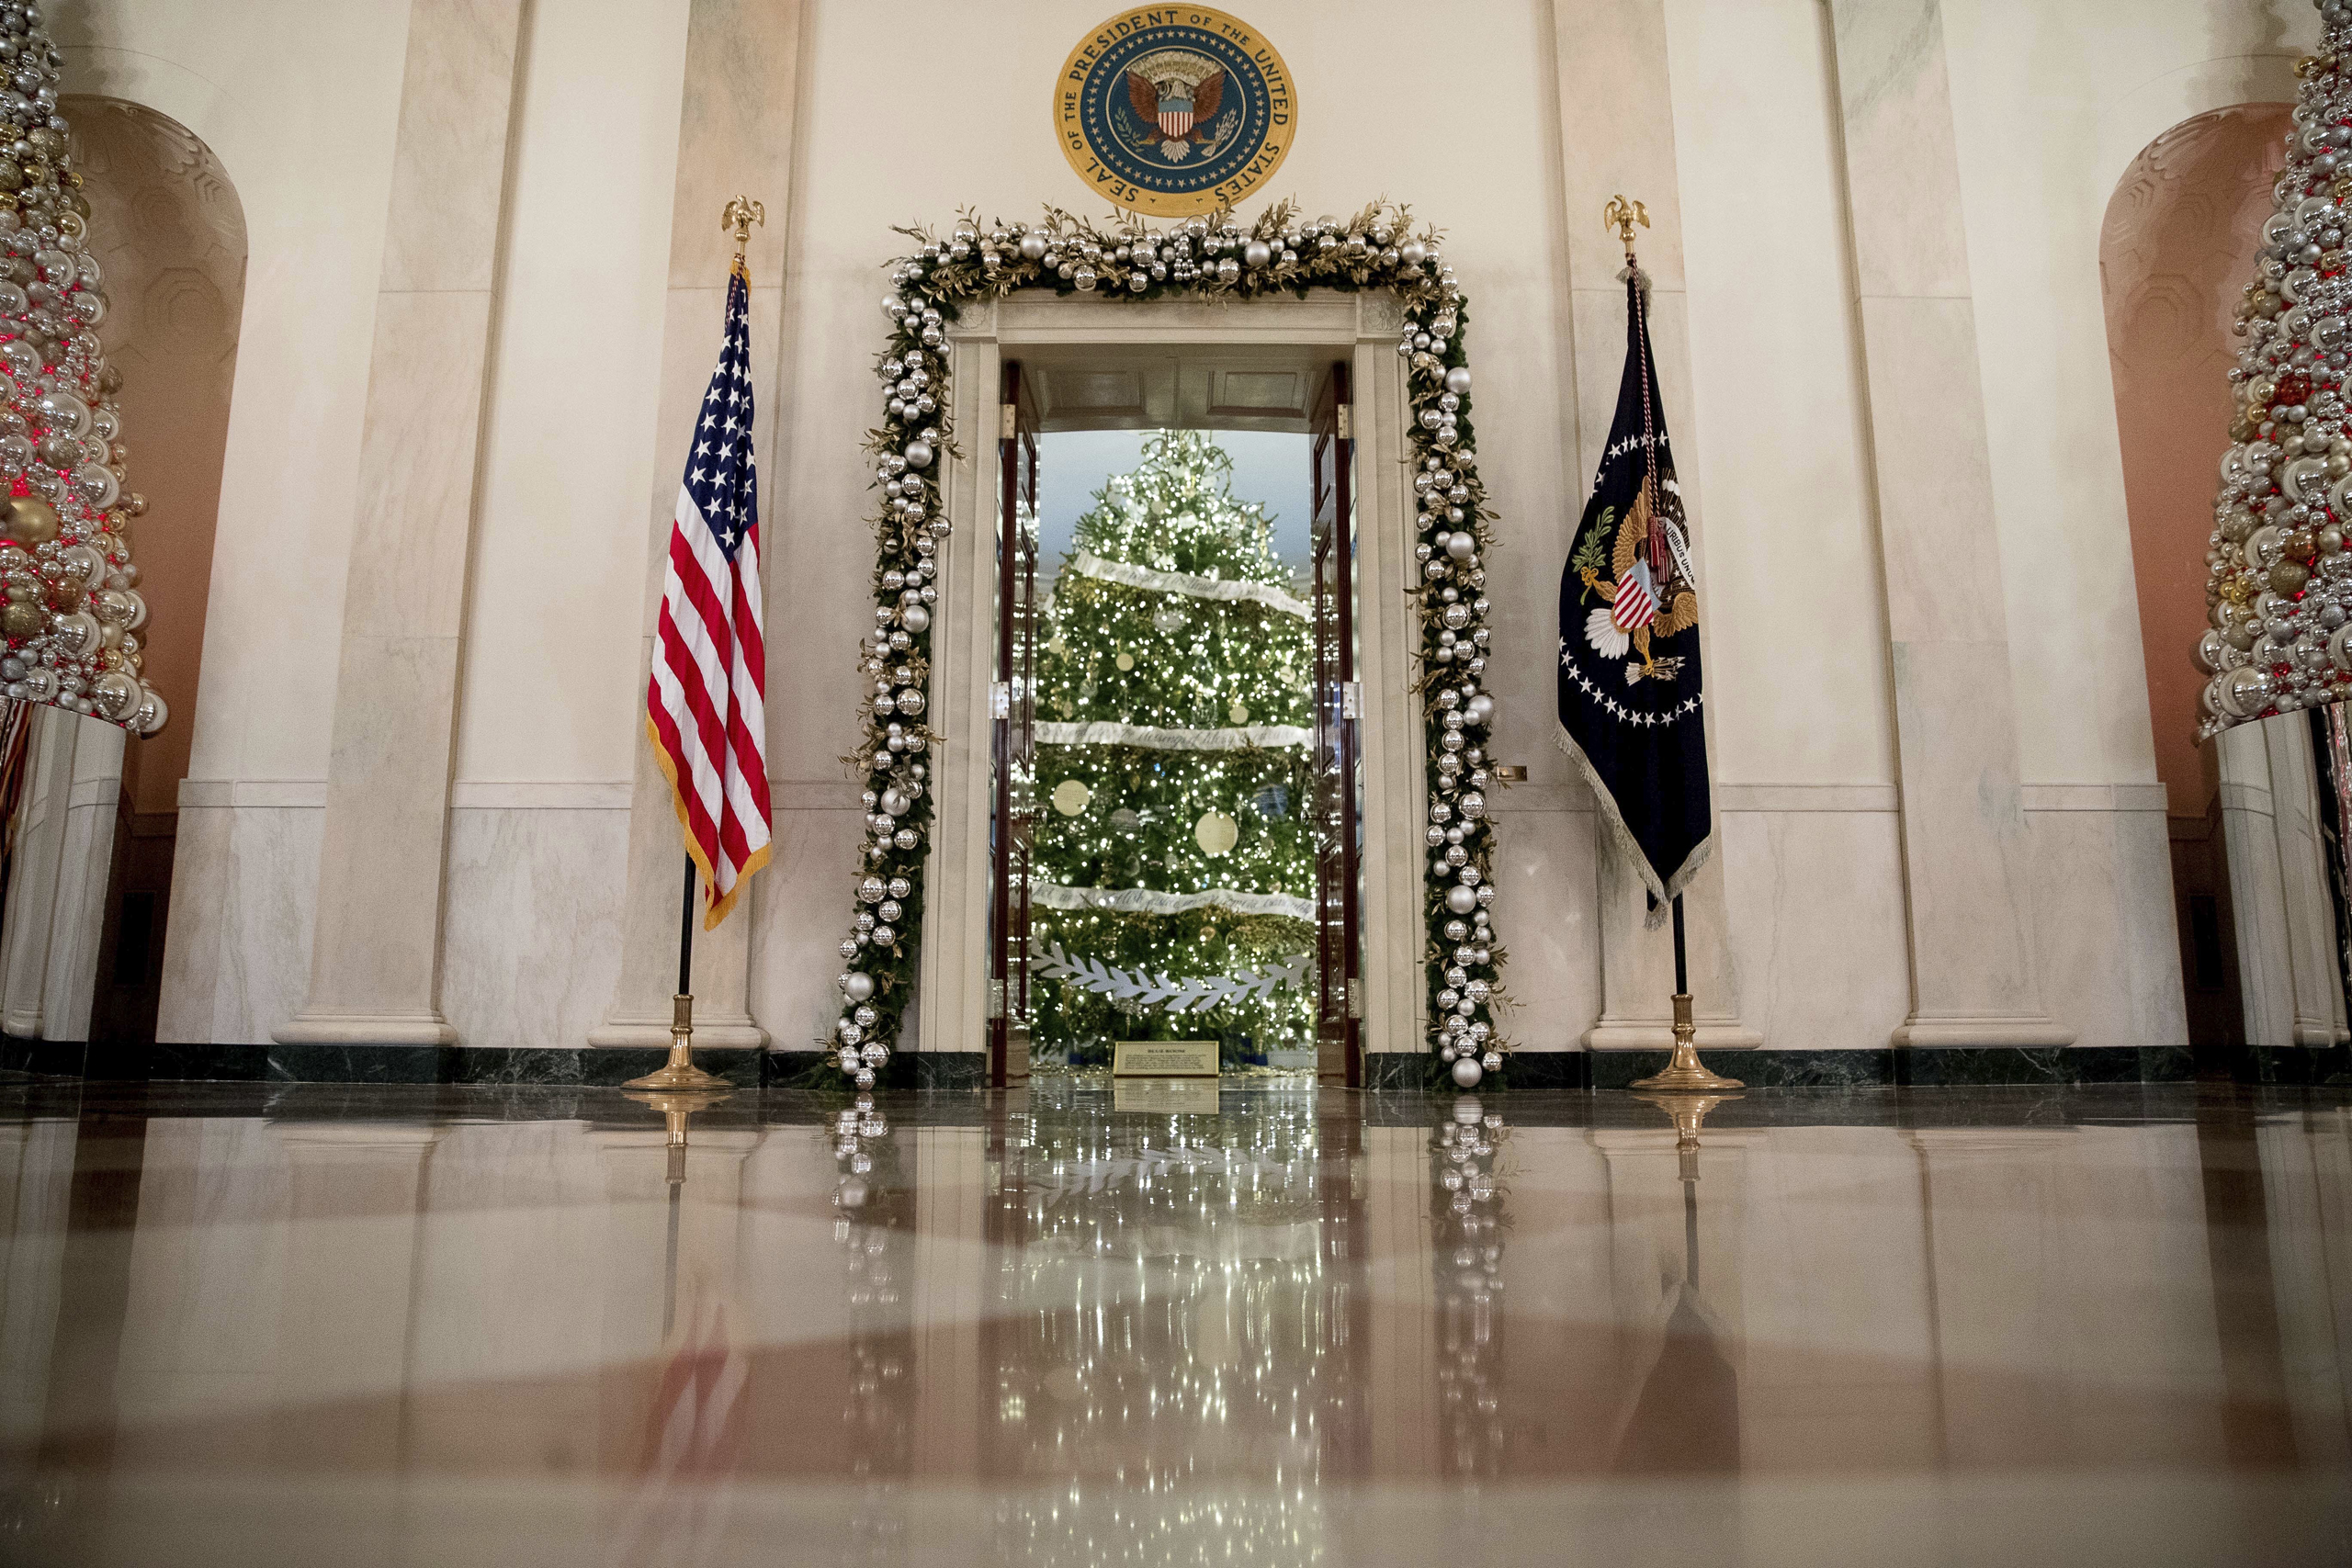 This year's White House Christmas Tree is seen inside the Blue Room from the Cross Hall of the White House during a preview of the 2016 holiday decor at the White House, on Nov. 29, 2016. (Andrew Harnik—AP)